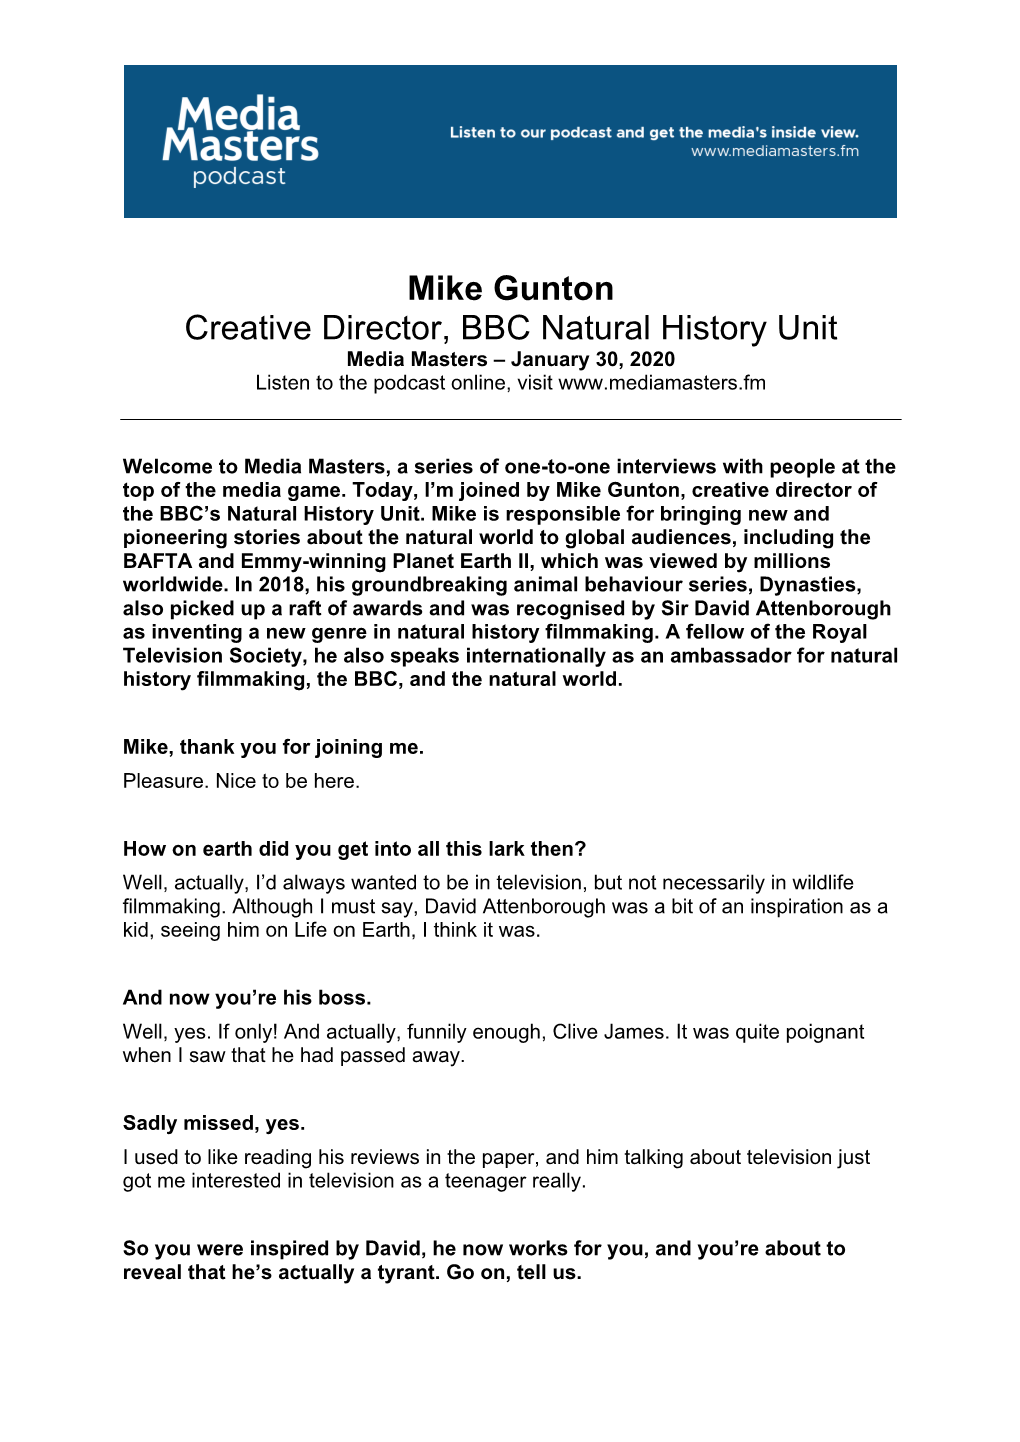 Mike Gunton Creative Director, BBC Natural History Unit Media Masters – January 30, 2020 Listen to the Podcast Online, Visit